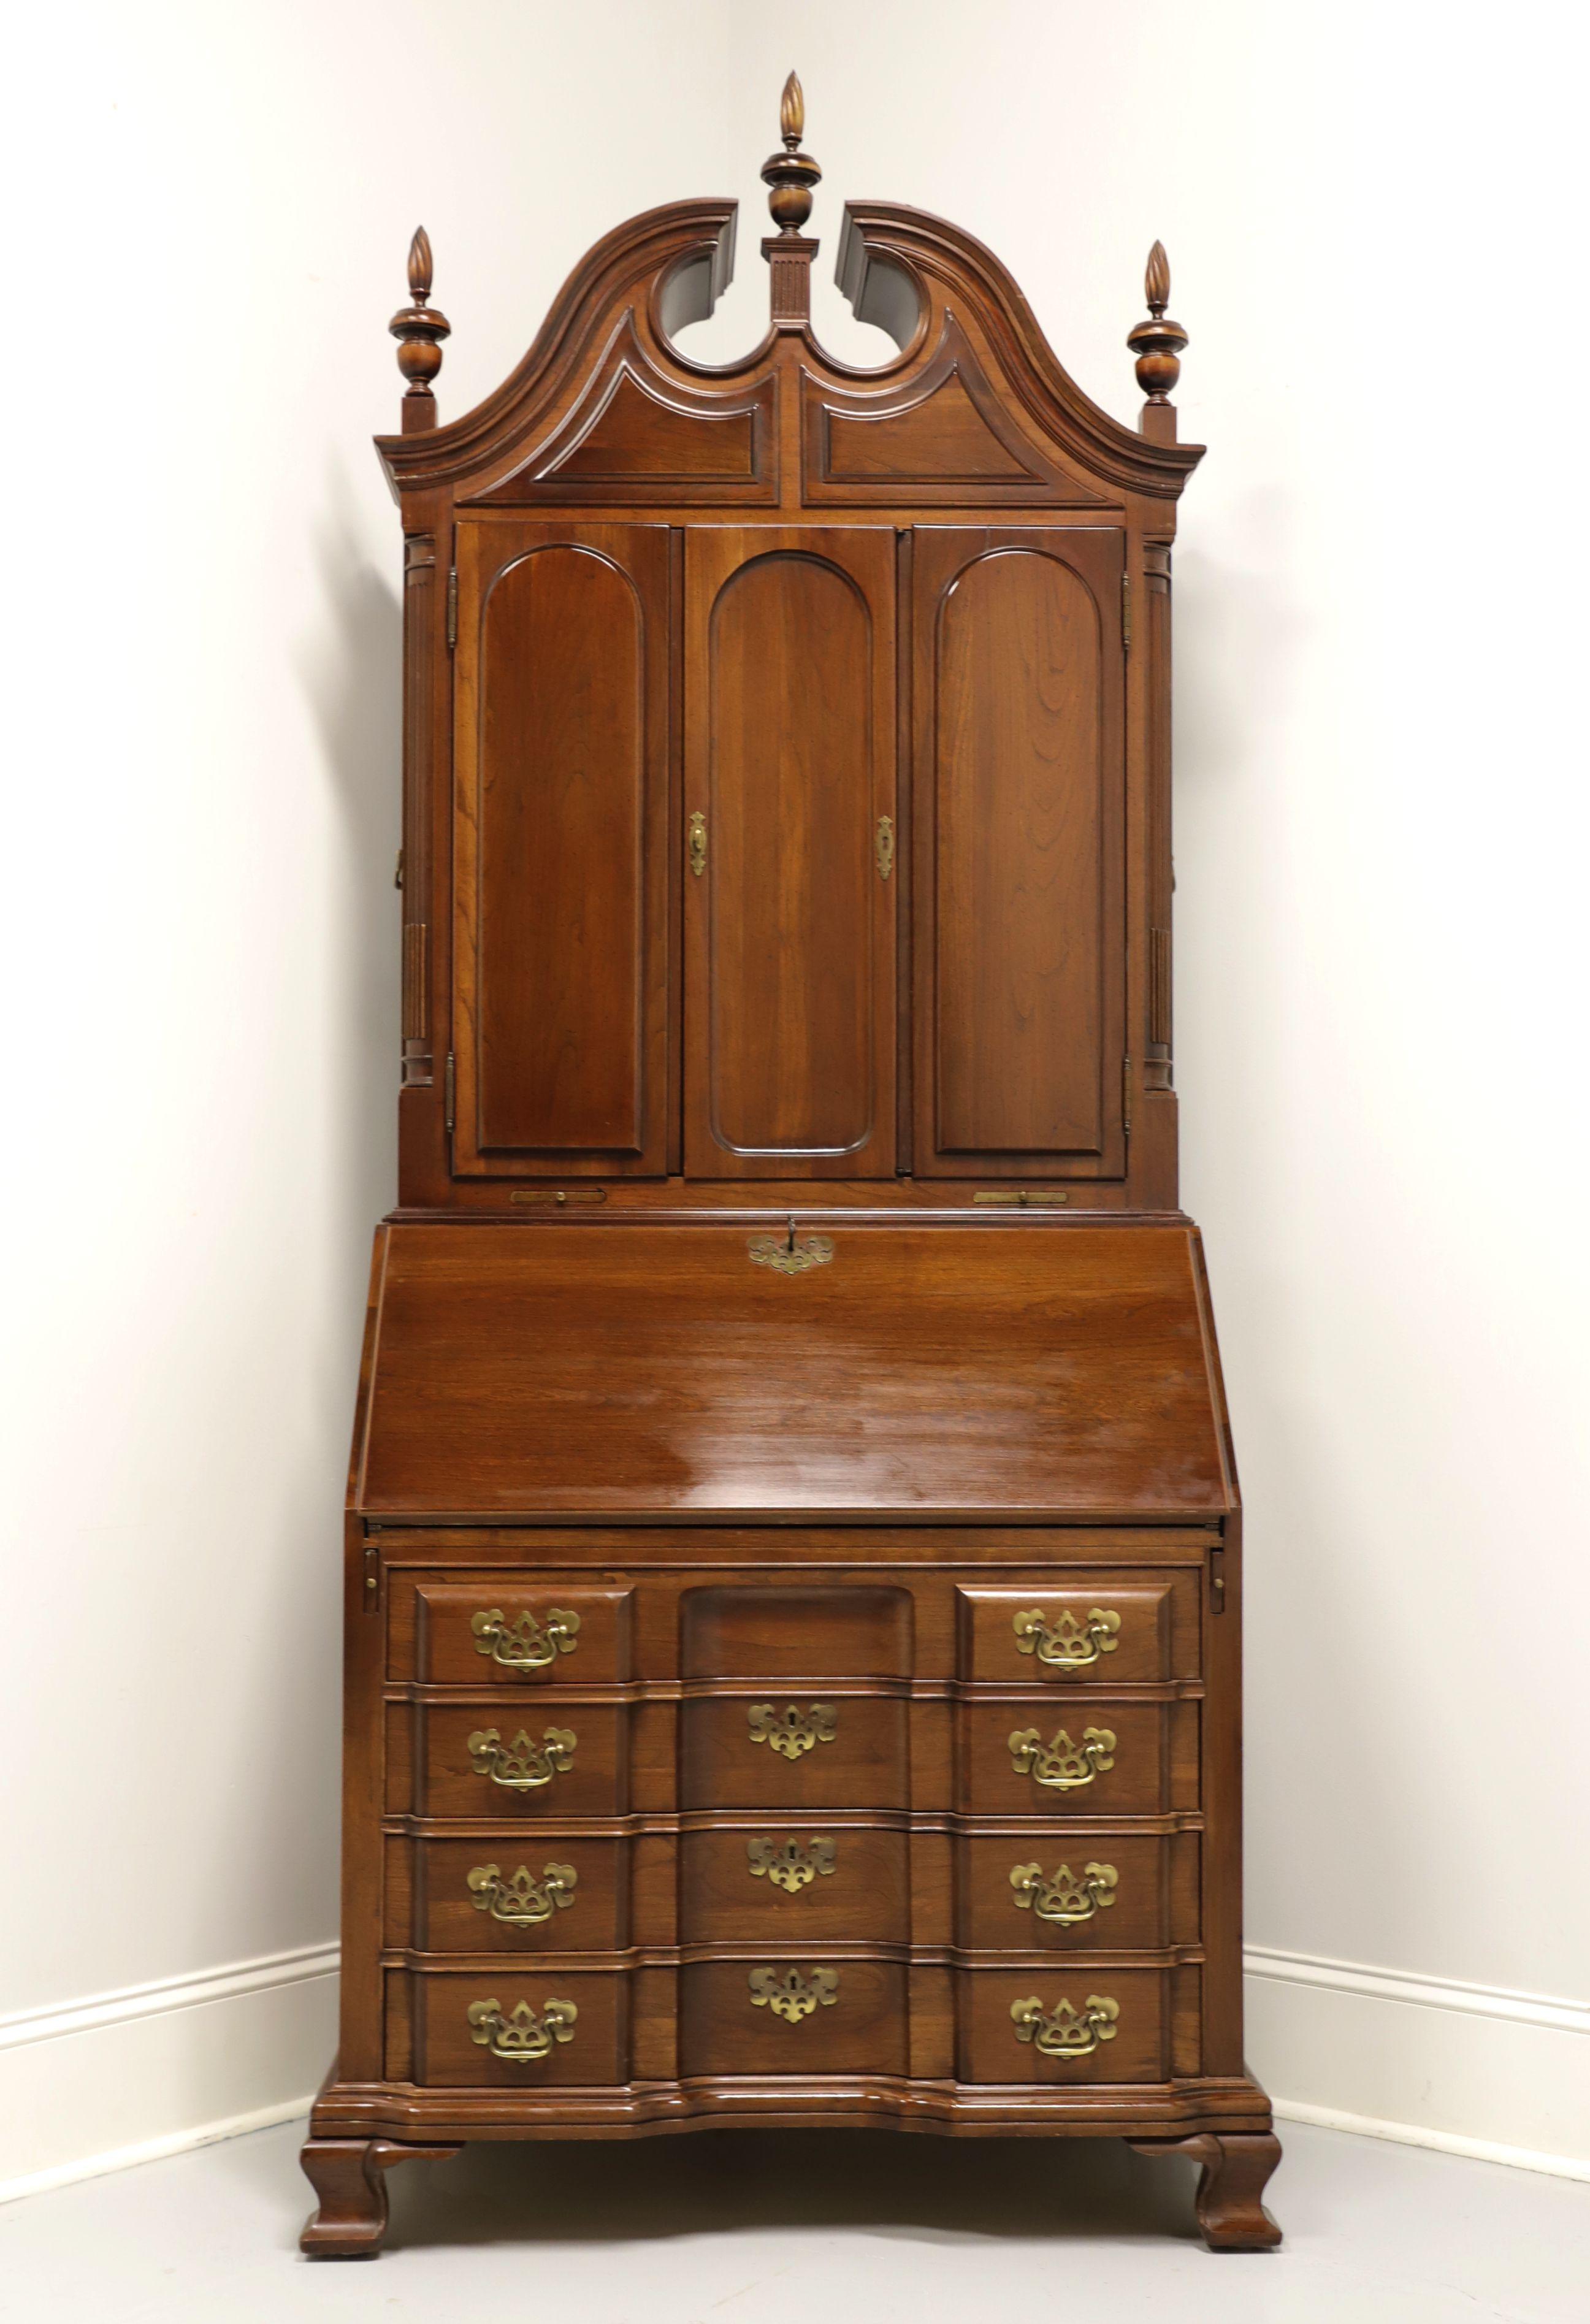 A Chippendale style licensed reproduction by Maddox Furniture of an 18th Century Secretary Desk created by Goddard Townsend of Newport, Rhode Island. Solid cherry with brass hardware, pediment top with three finials and ogee bracket feet. Upper